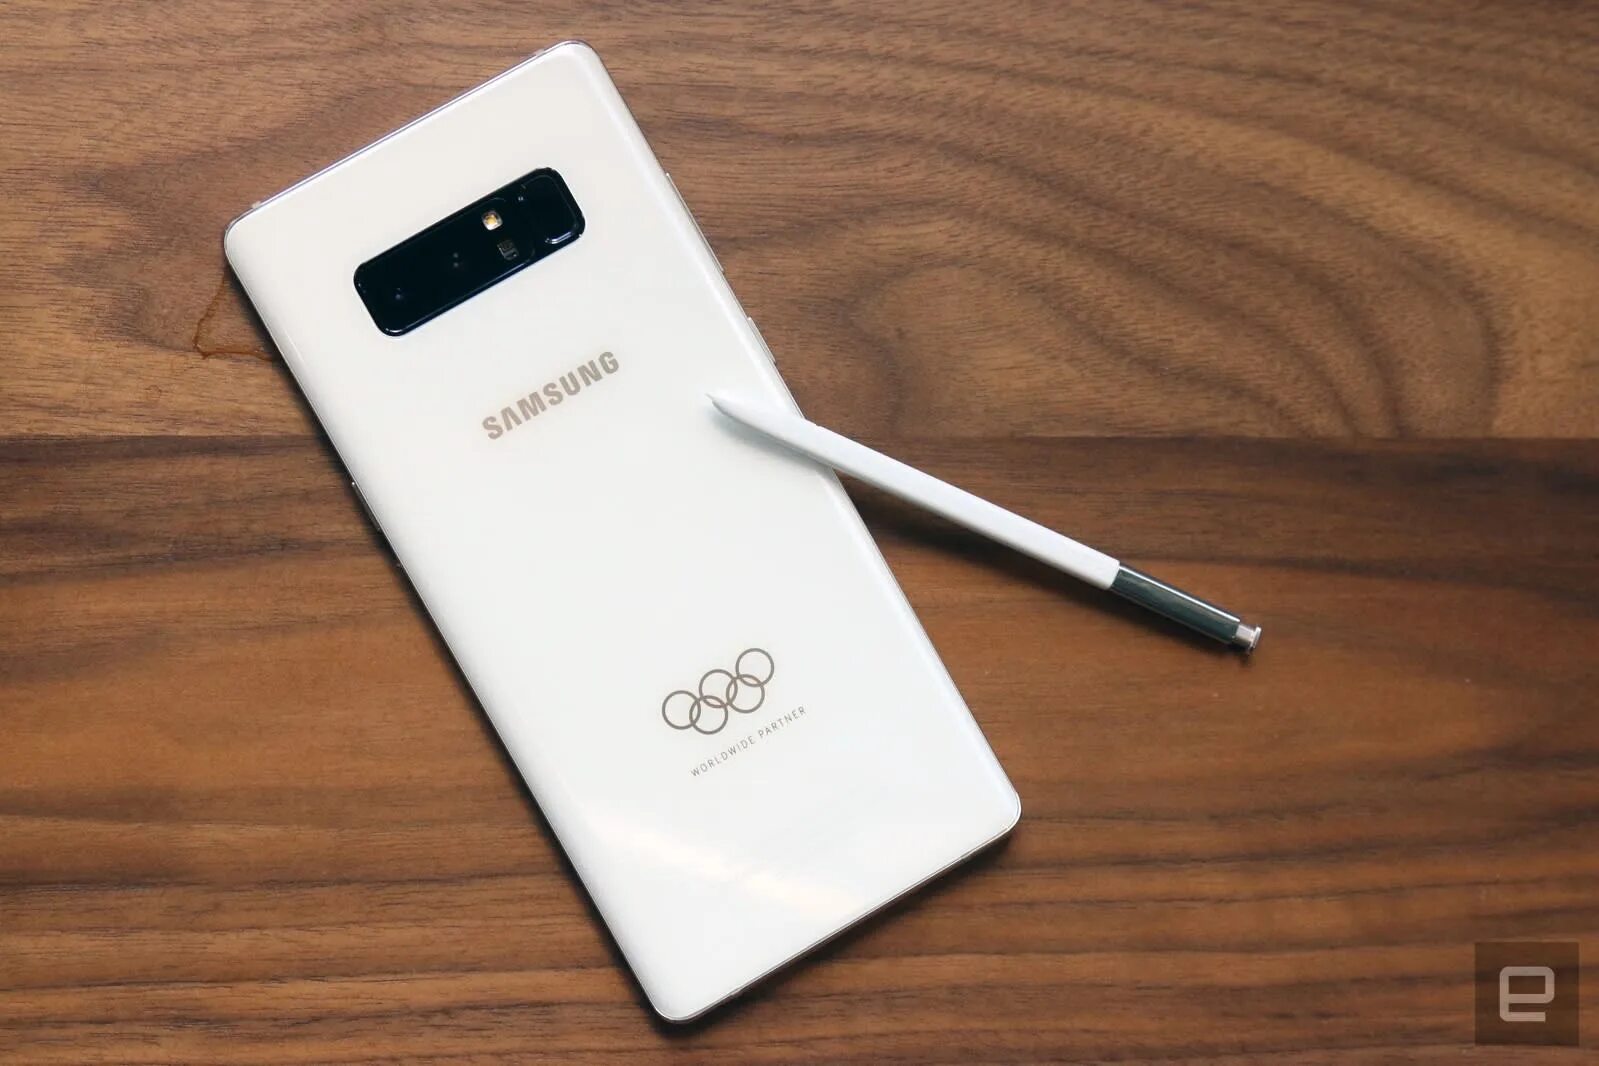 Samsung Note 8 White. Note 8 Olympic Edition Galaxy. Samsung Galaxy Note 4 Olympus Edition. Олимпийский Note 8. Игры note 8